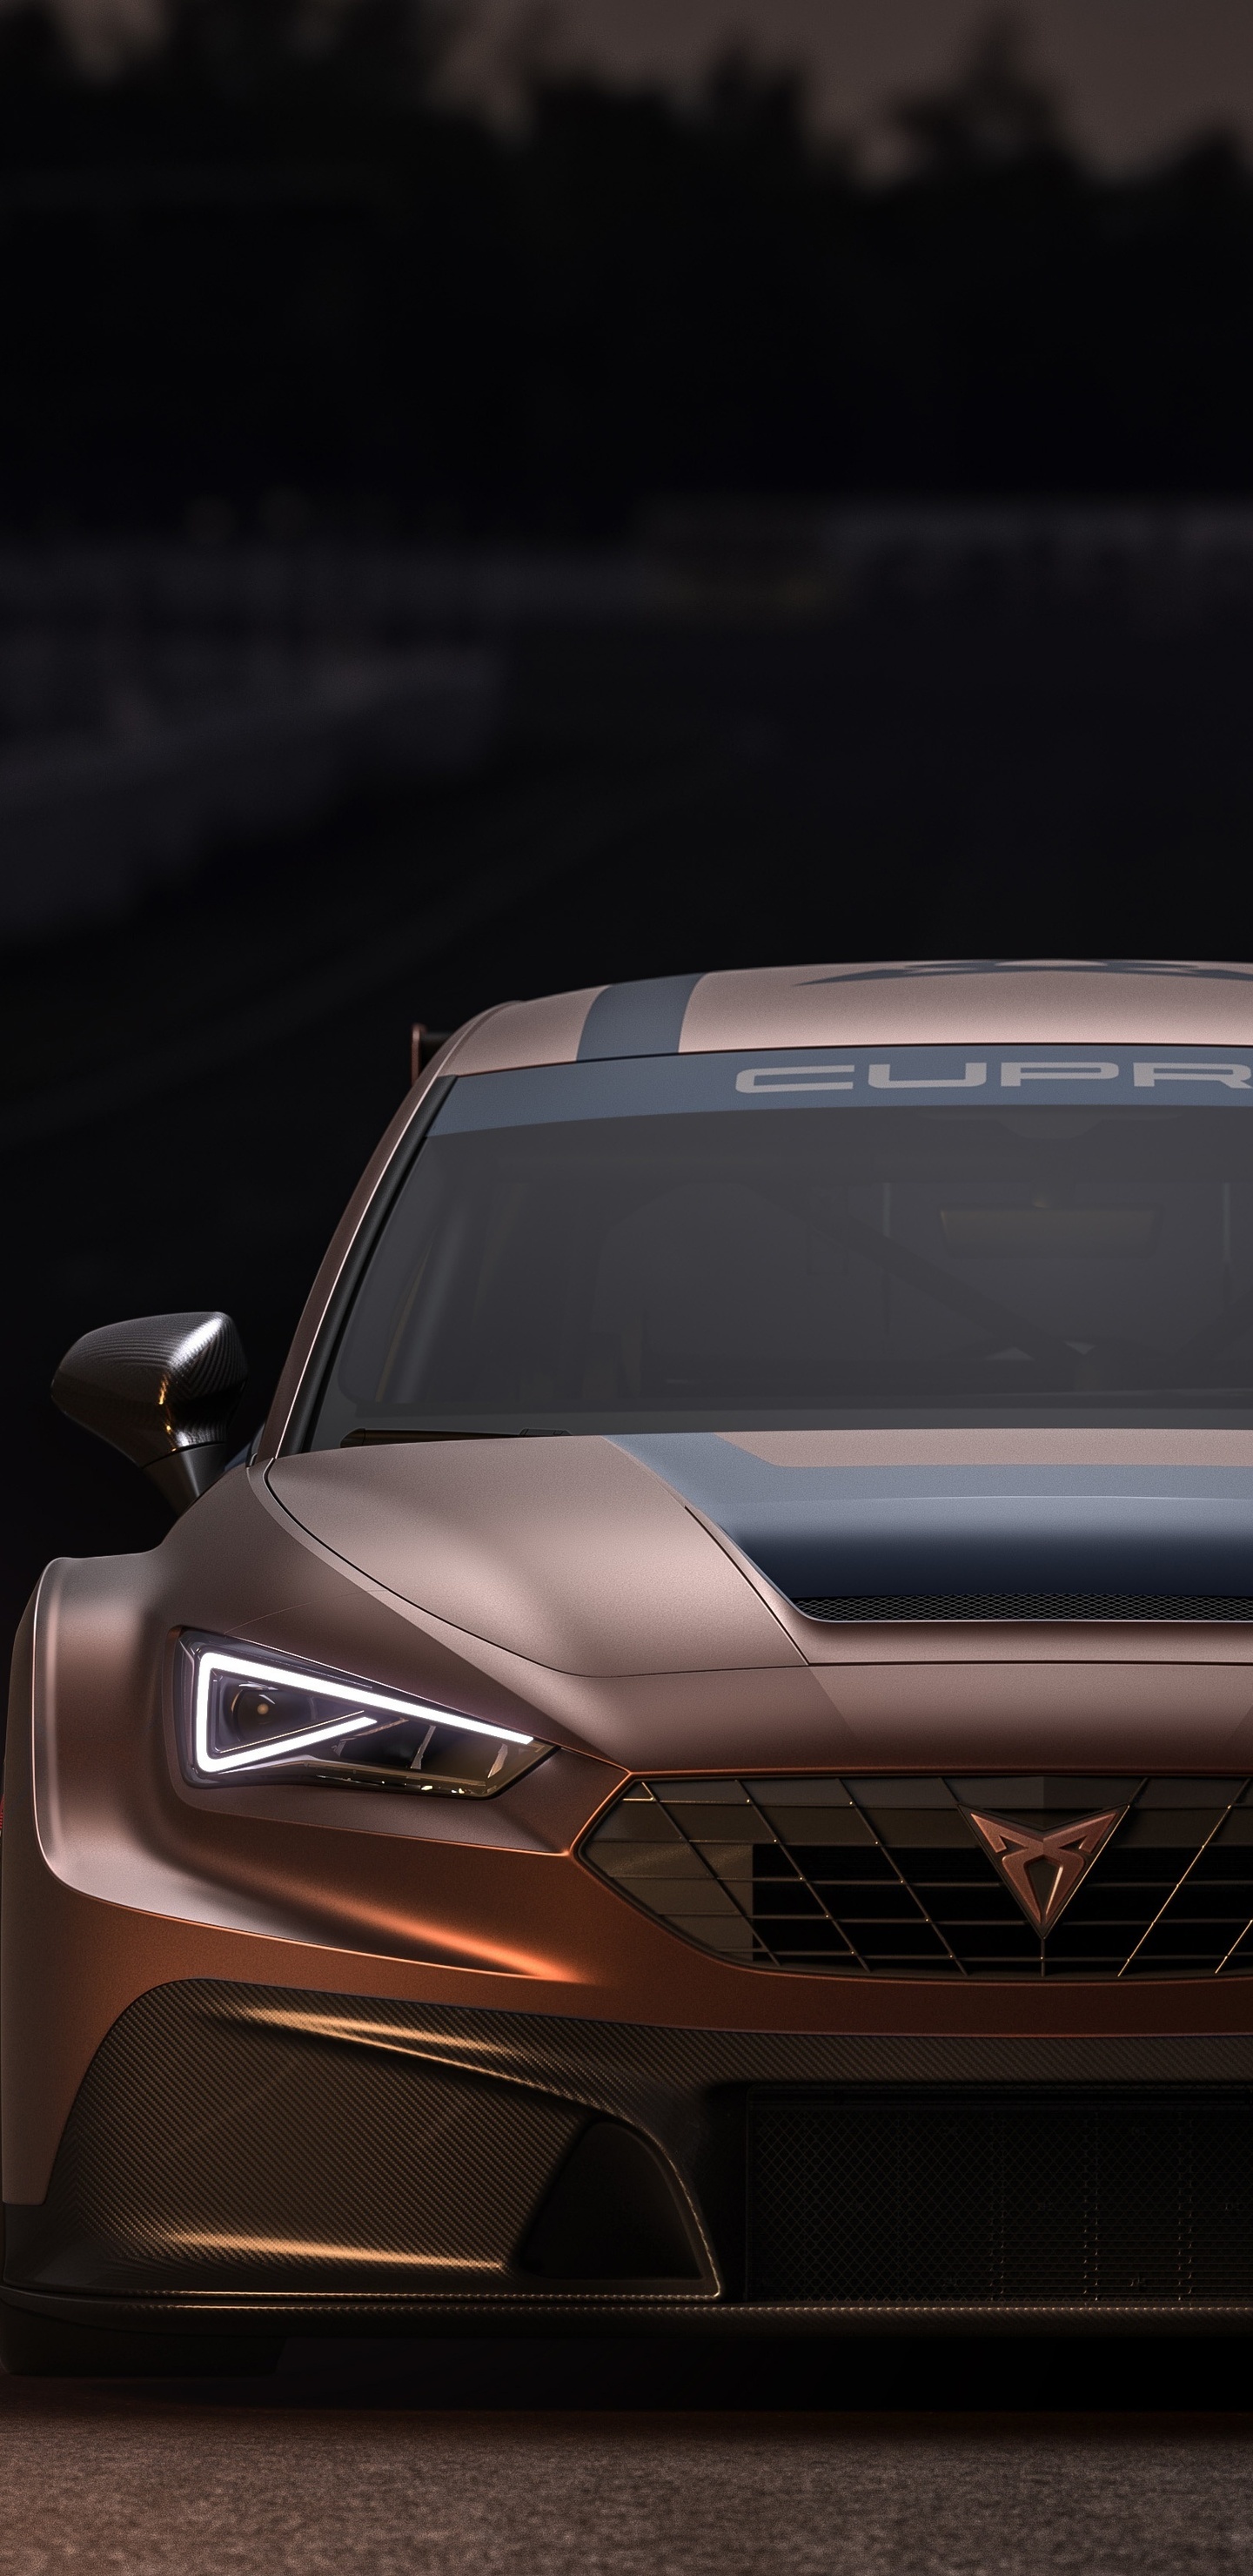 Seat Leon, 2020 samsung galaxy note, Images backgrounds photos, Competition cupra, 1440x2960 HD Handy